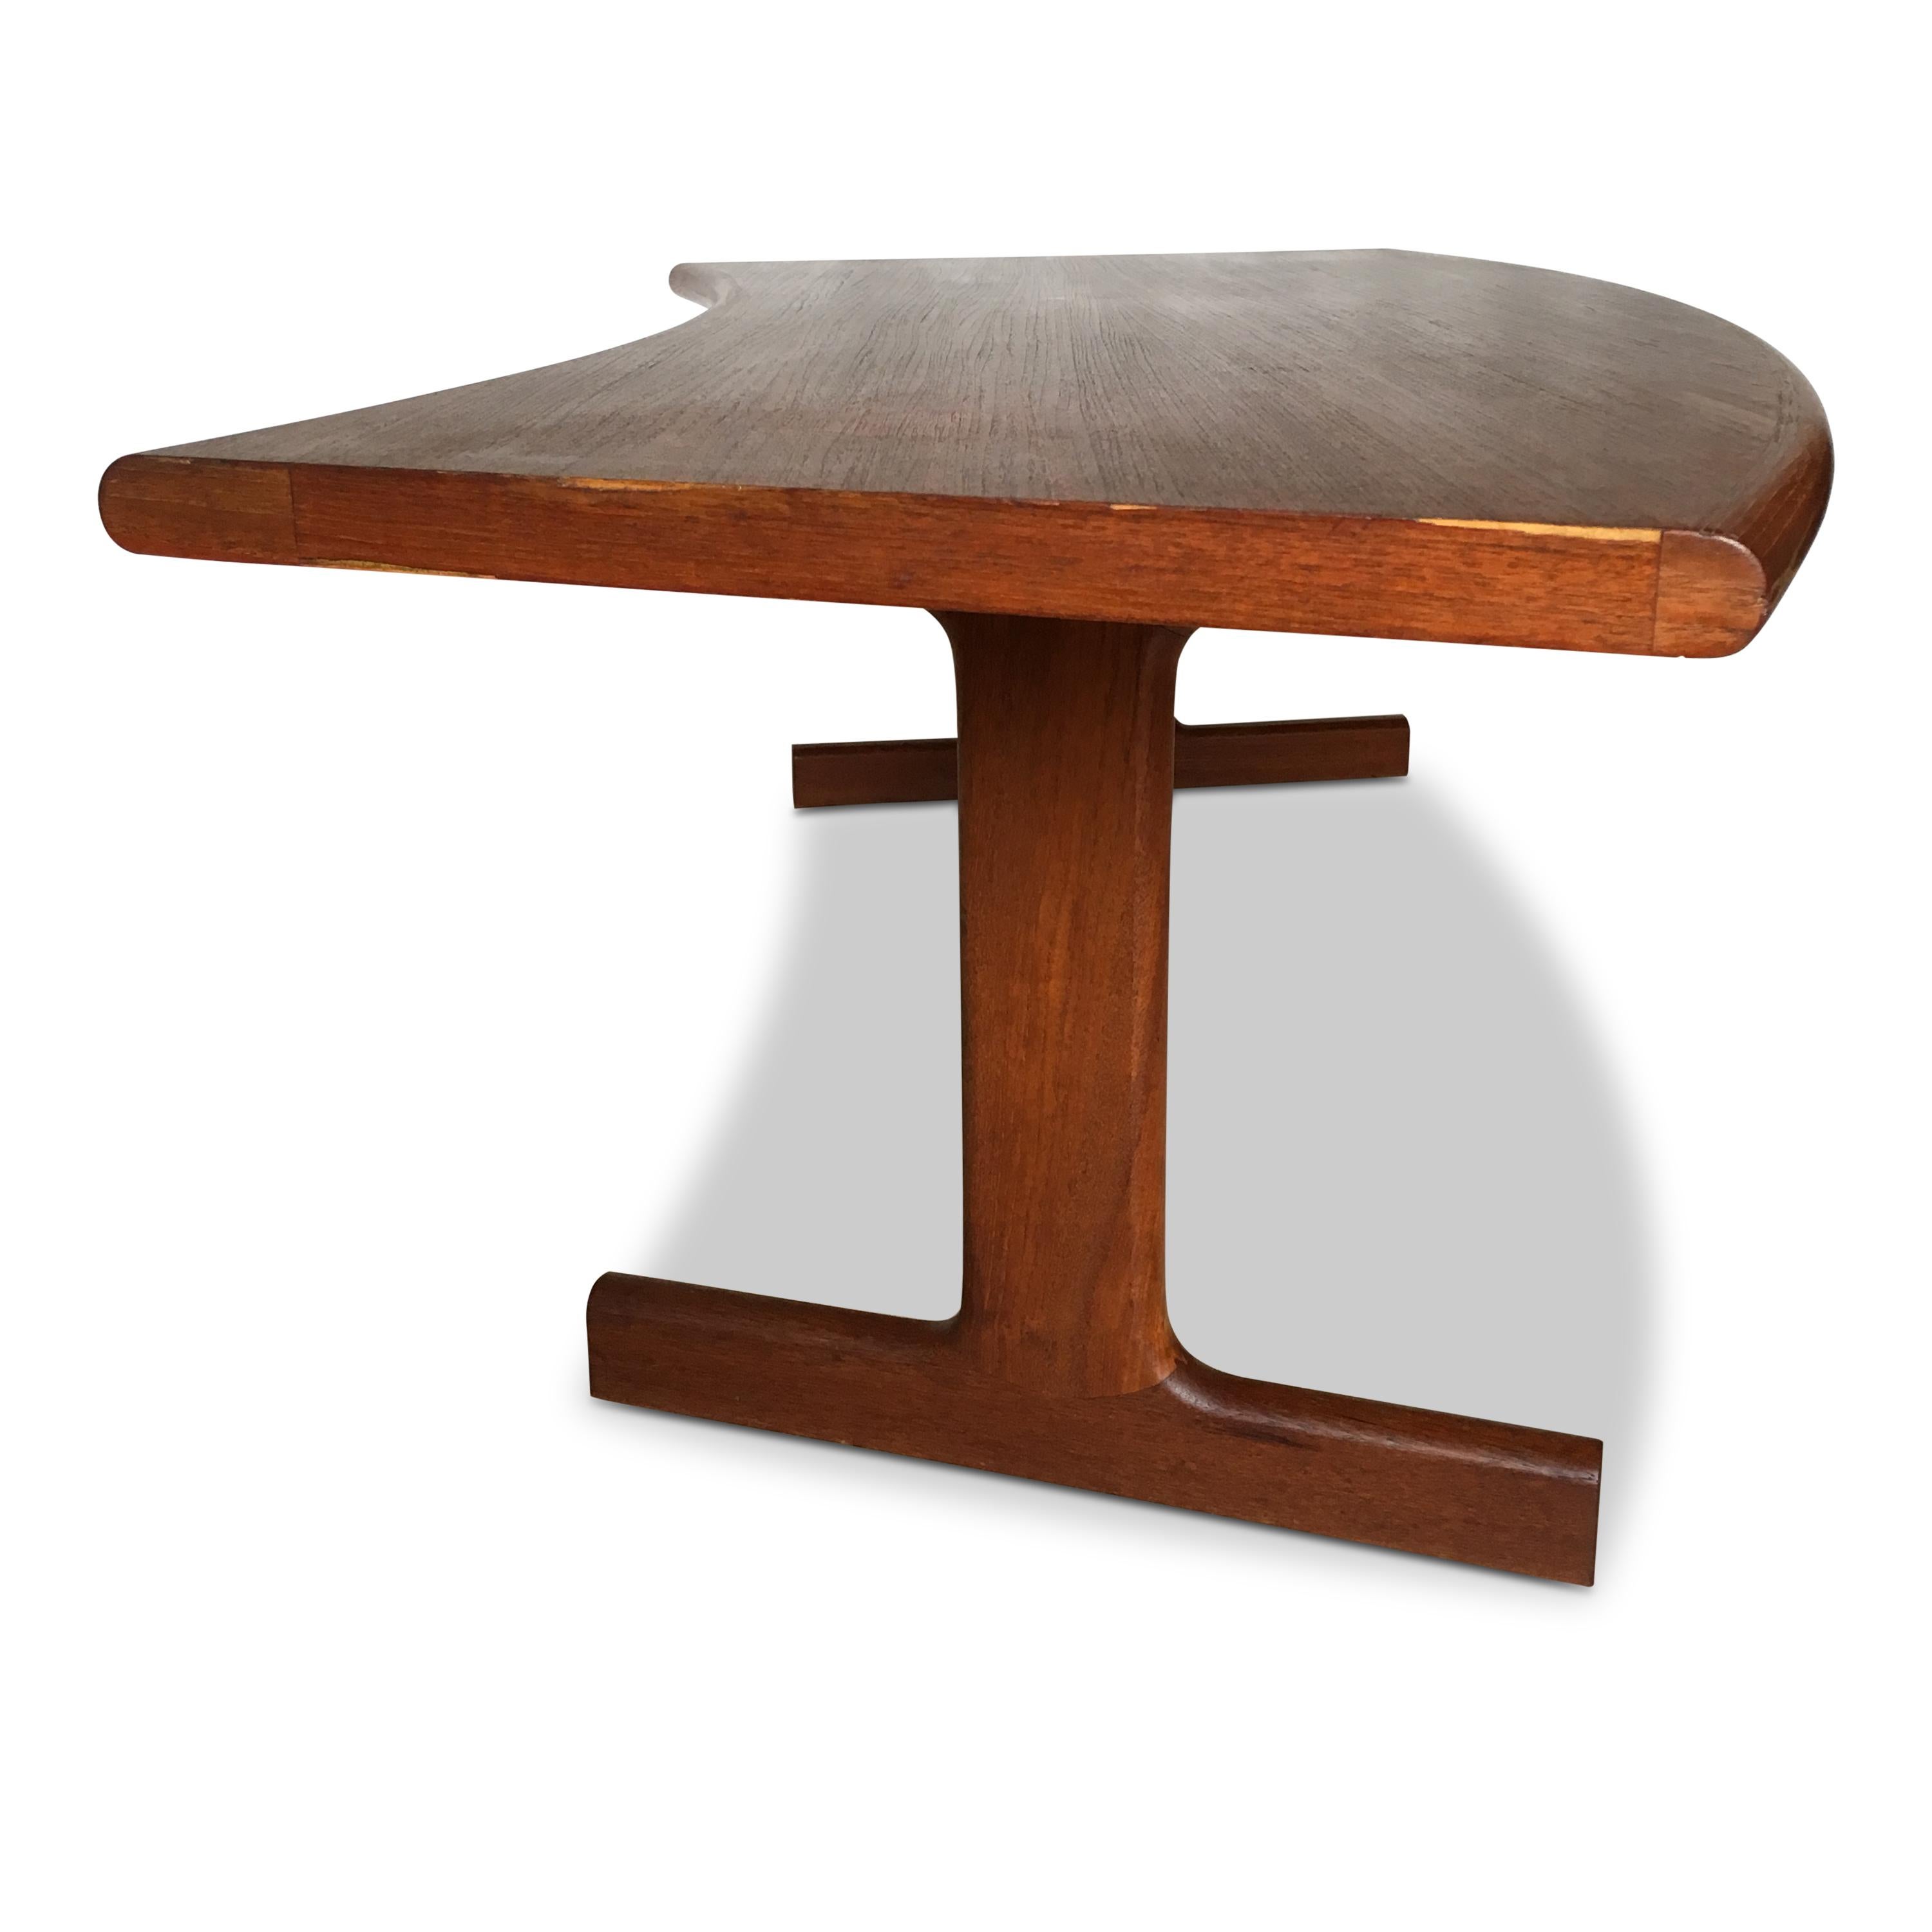 Midcentury Danish Teak Coffee Table with Curved Desk, 1950s For Sale 1